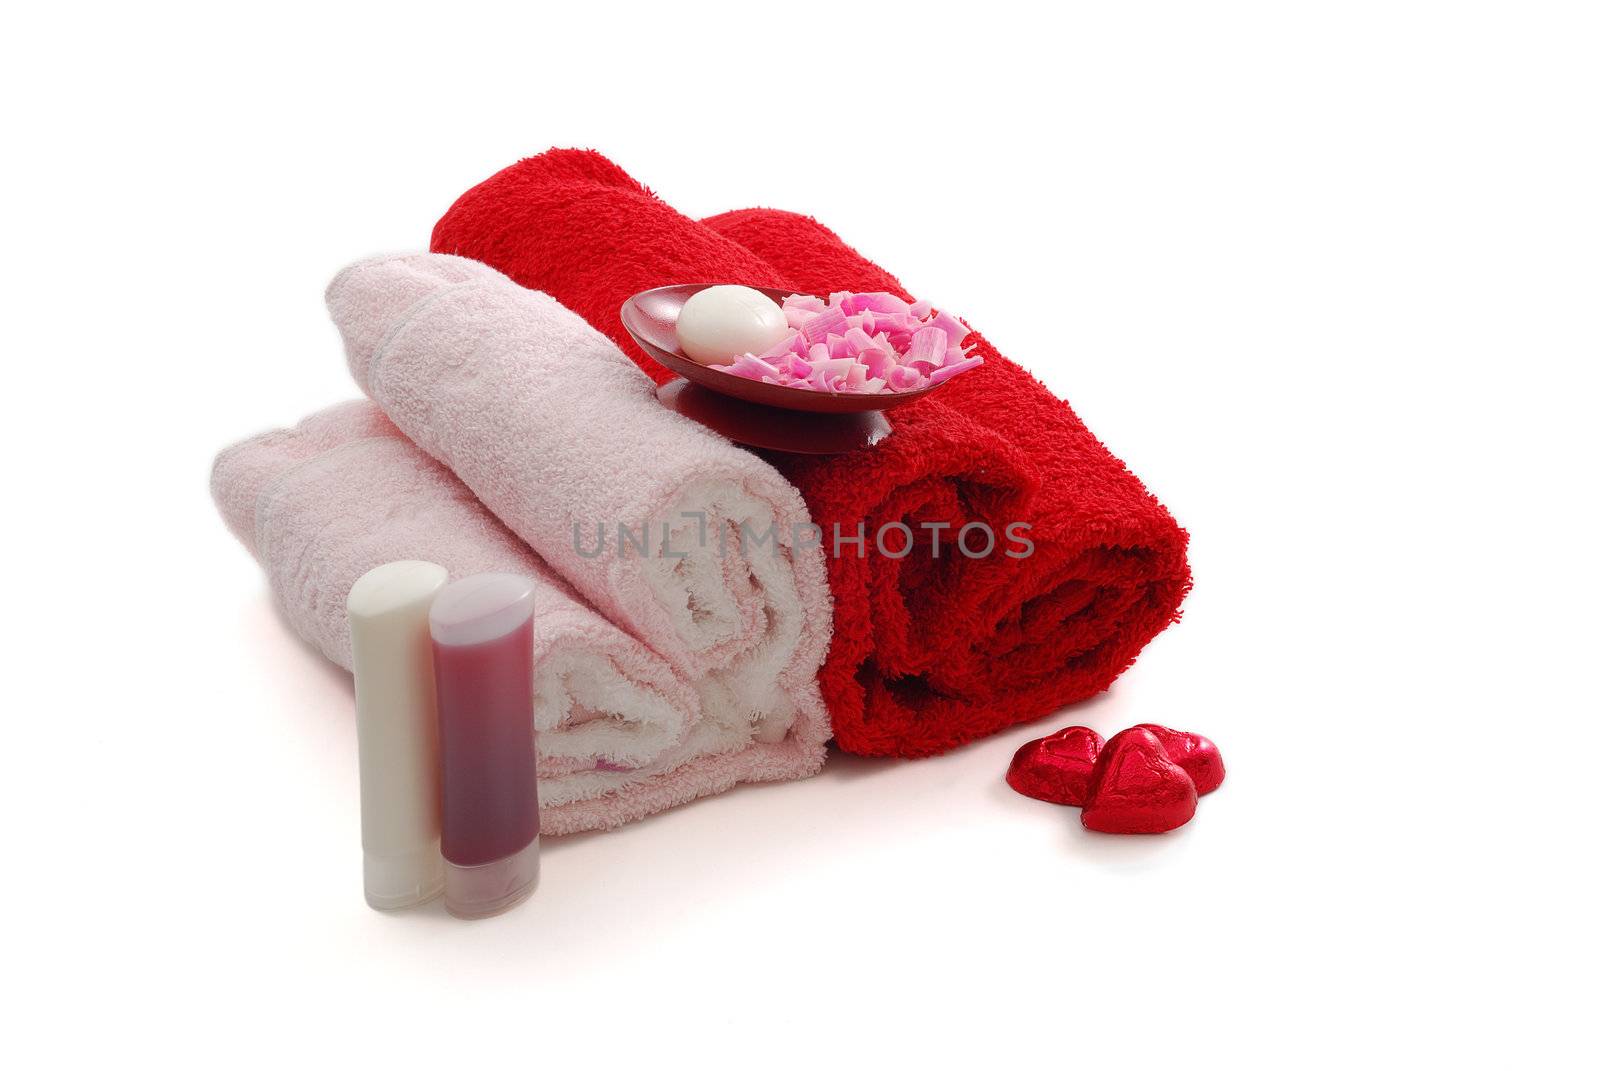 Romantic Valentine Day SPA set including heart shaped towels, soap, candies on white background